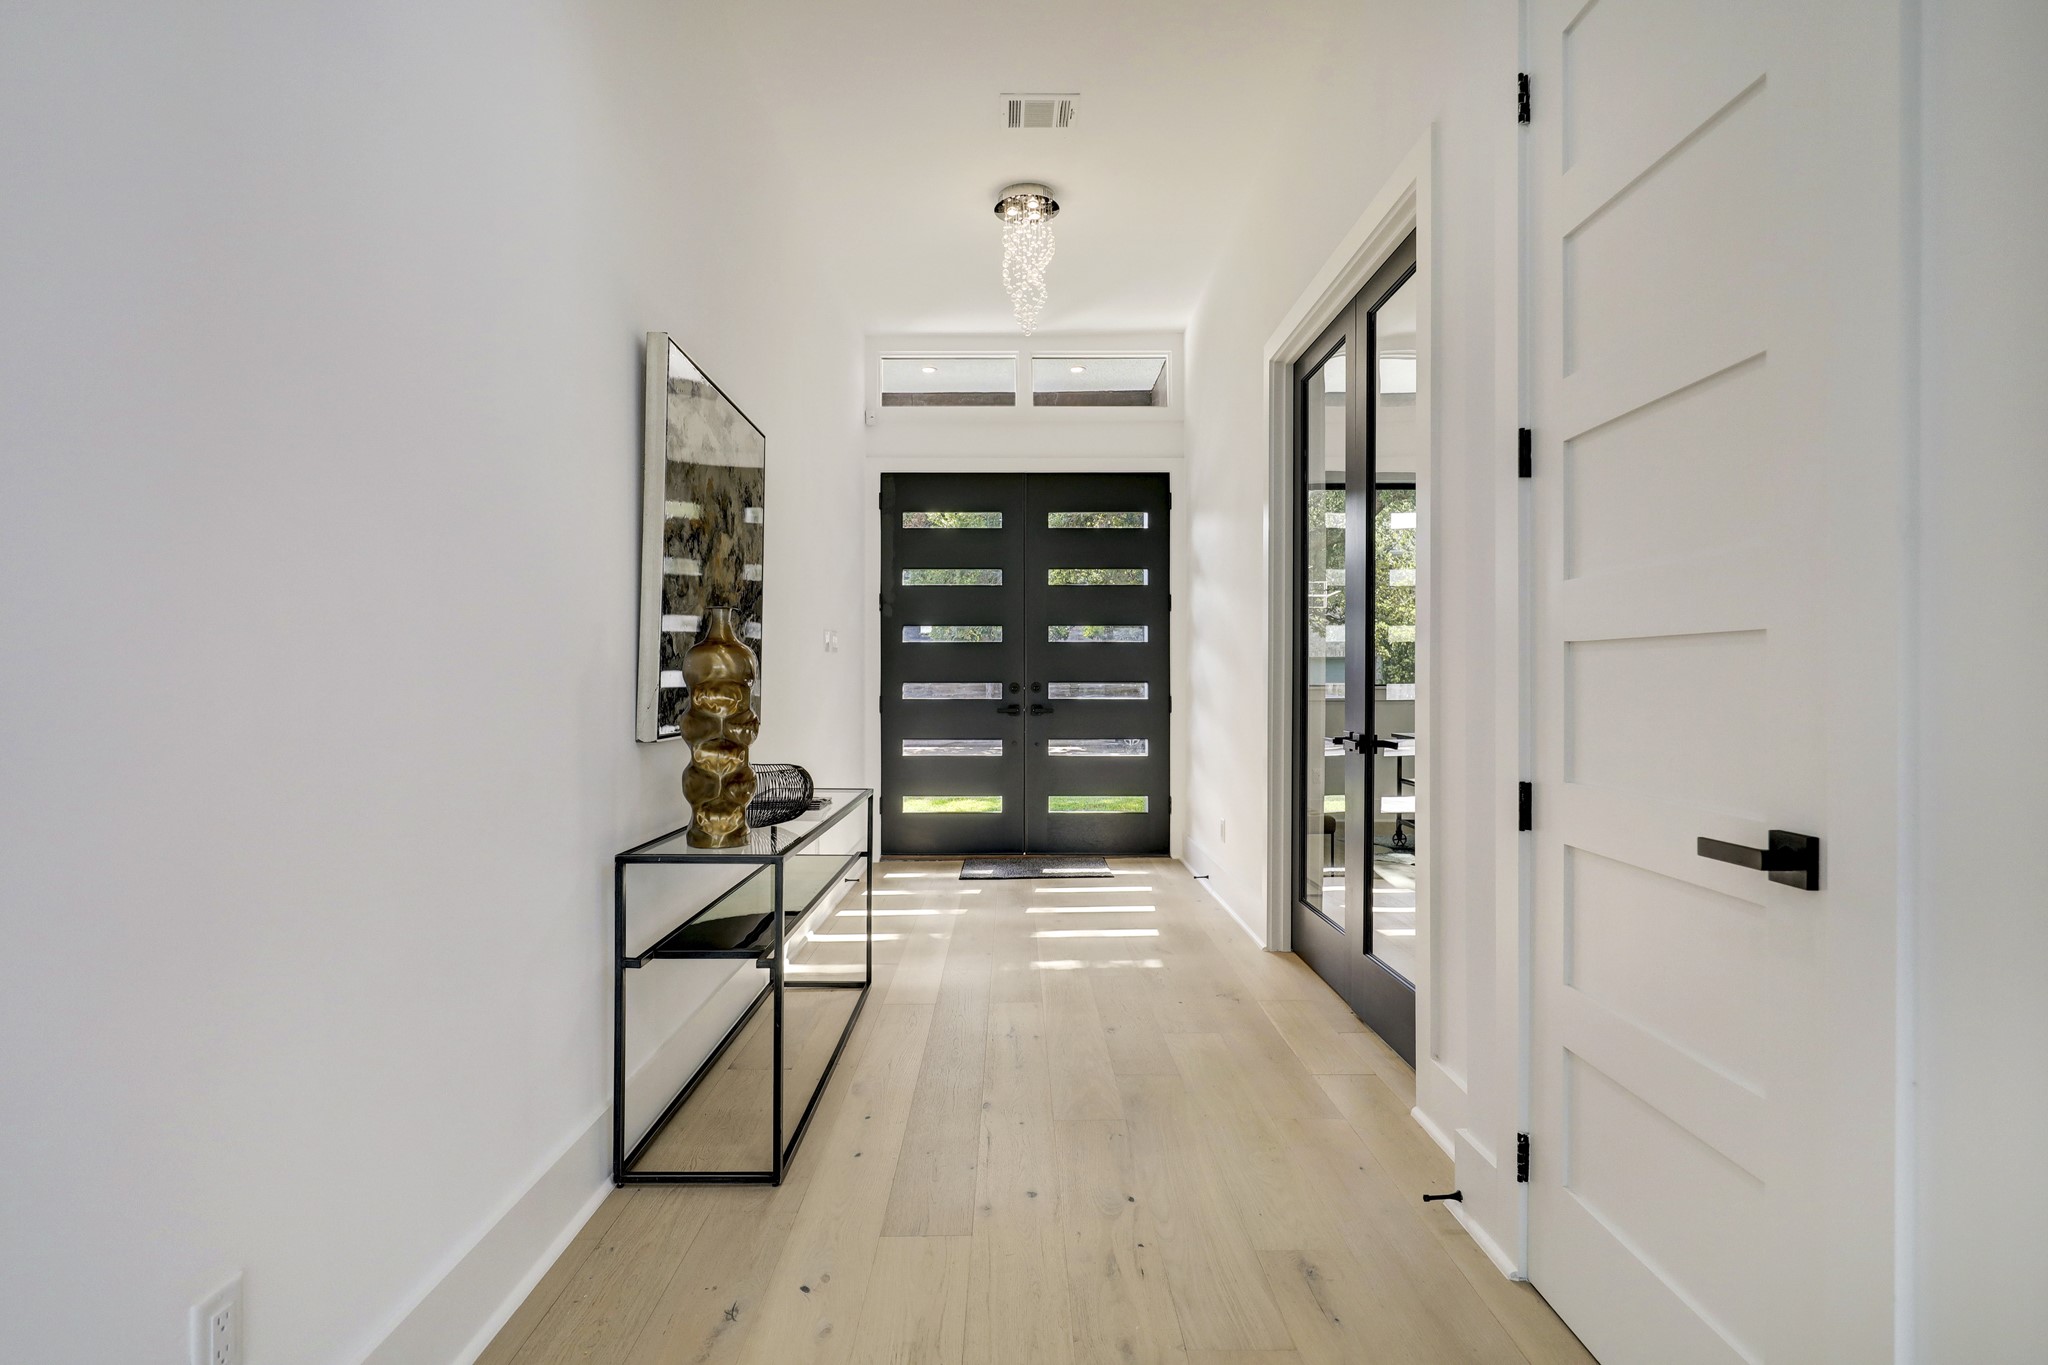 Step through the oversized modern doors for a preview of the exquisite details and contemporary finishes that fill this home the front door to the back.